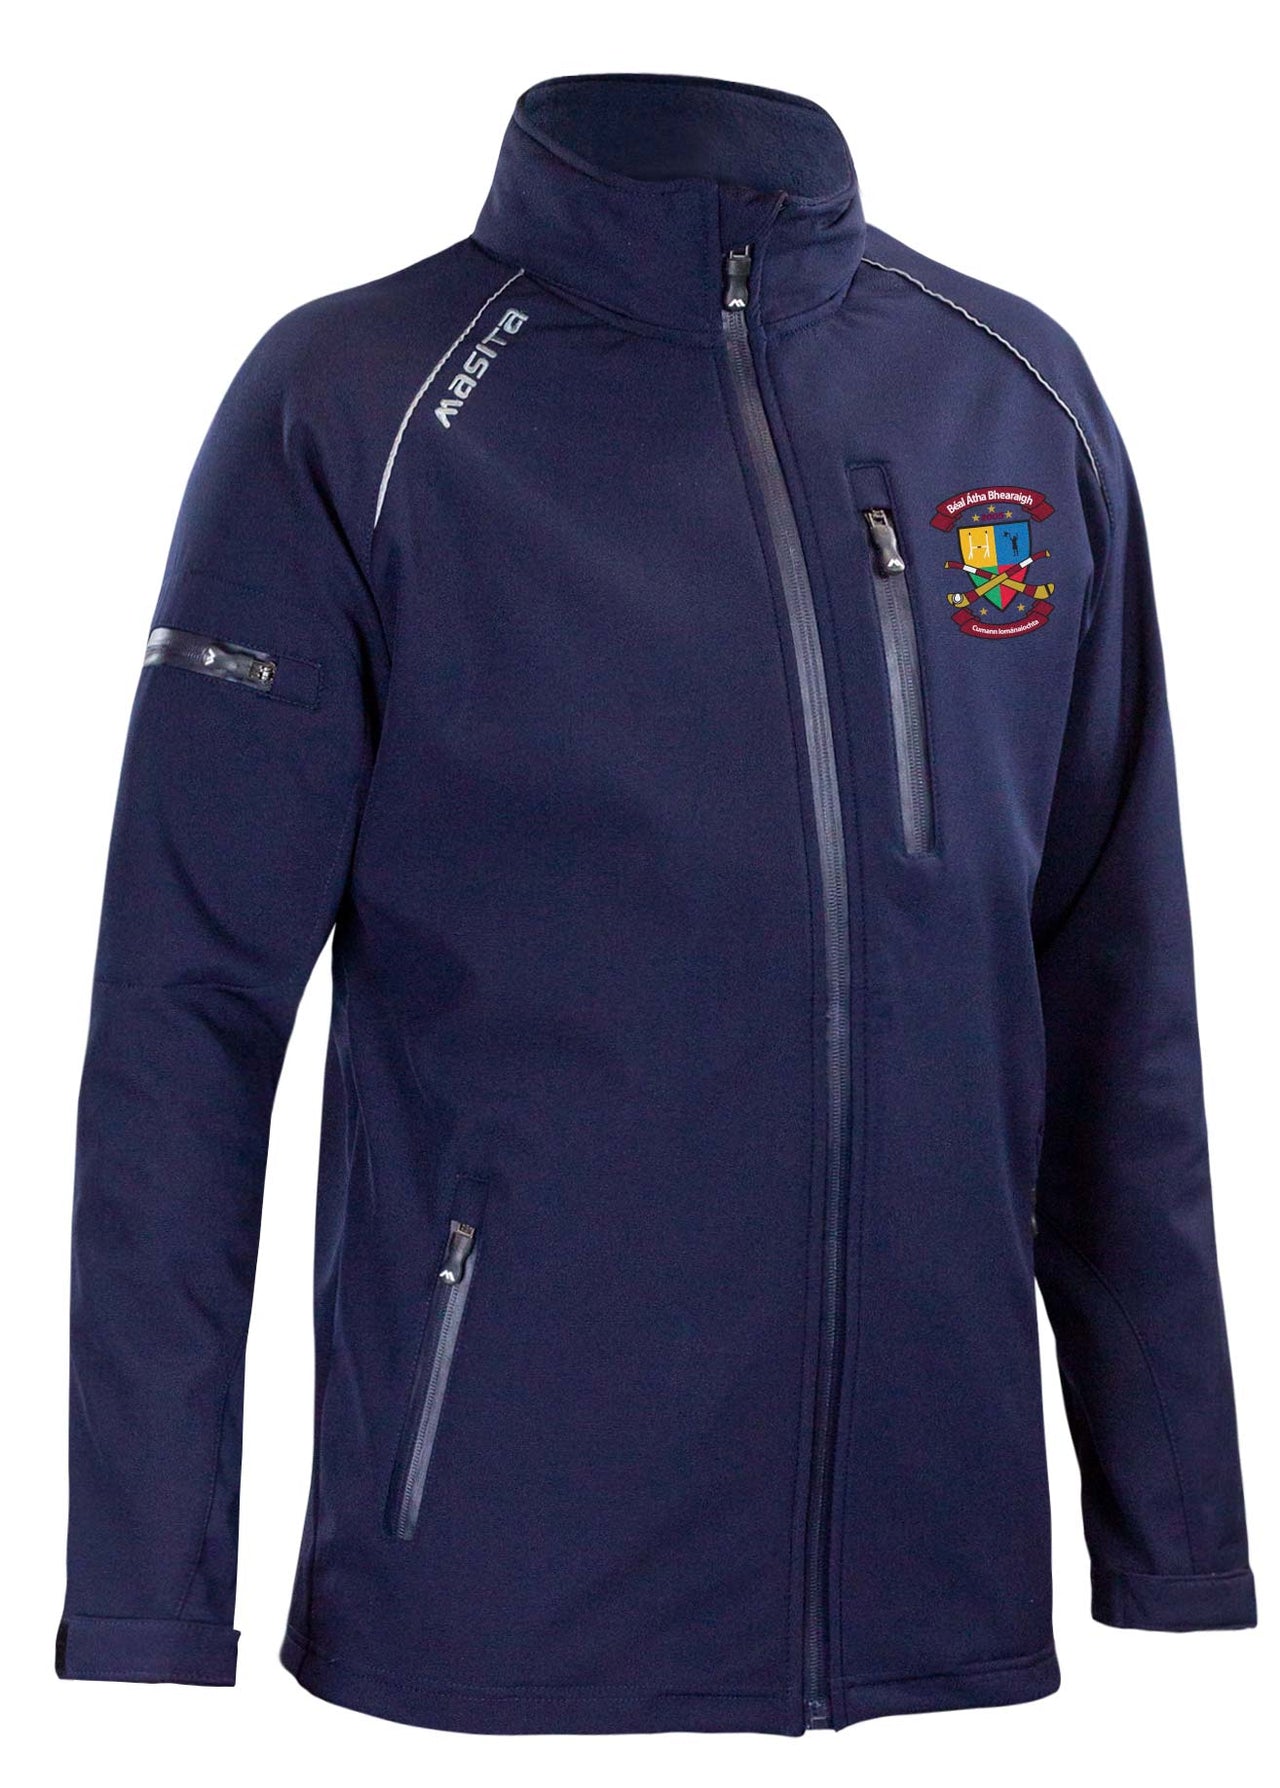 Ballyvary CLG Soft Cell Jacket Adult